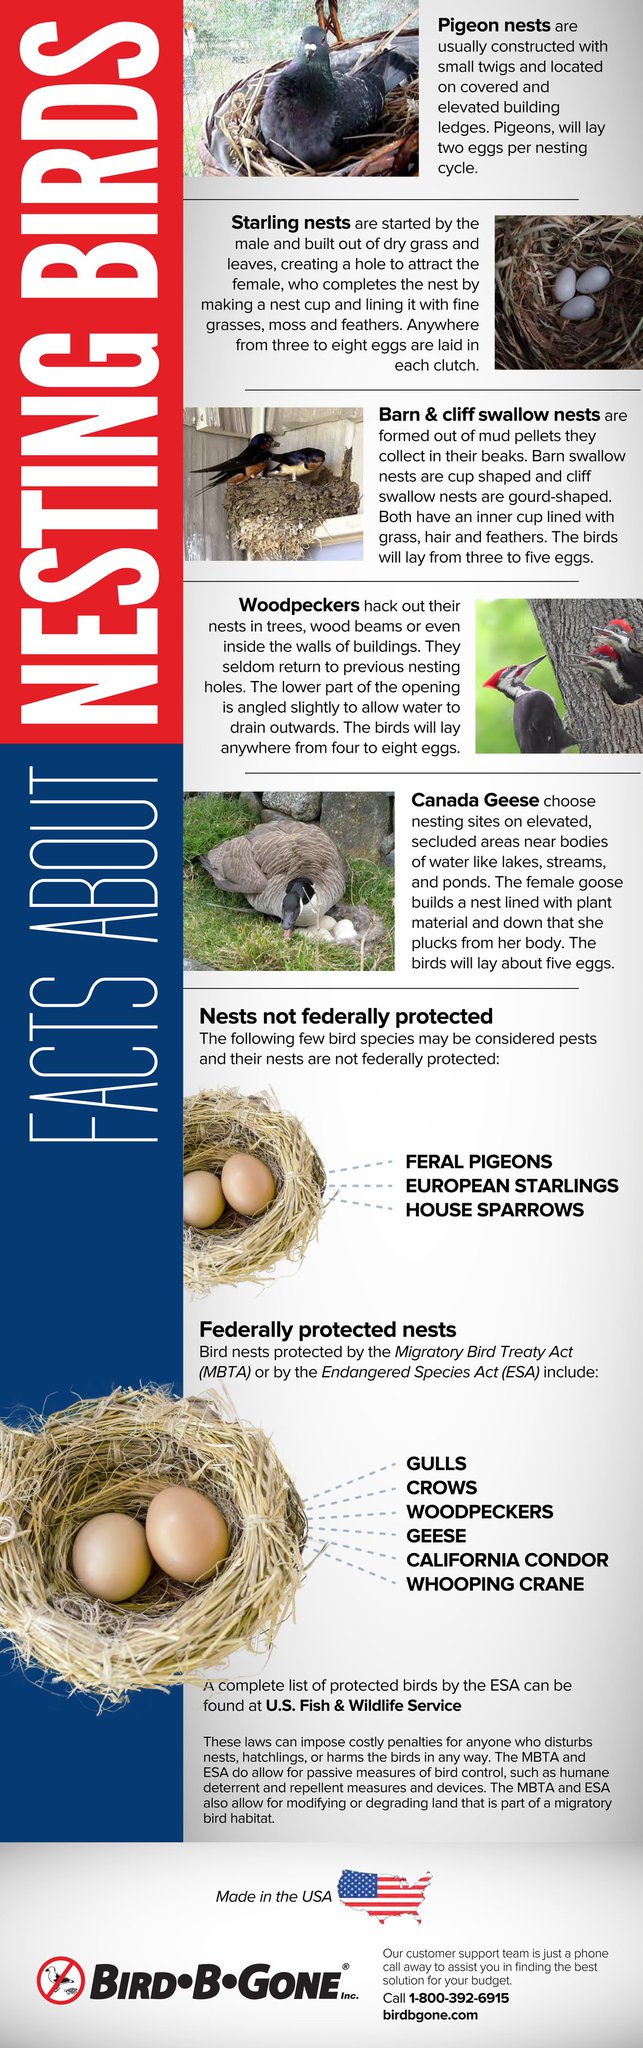 The Facts on Nesting Pest Birds Infographic